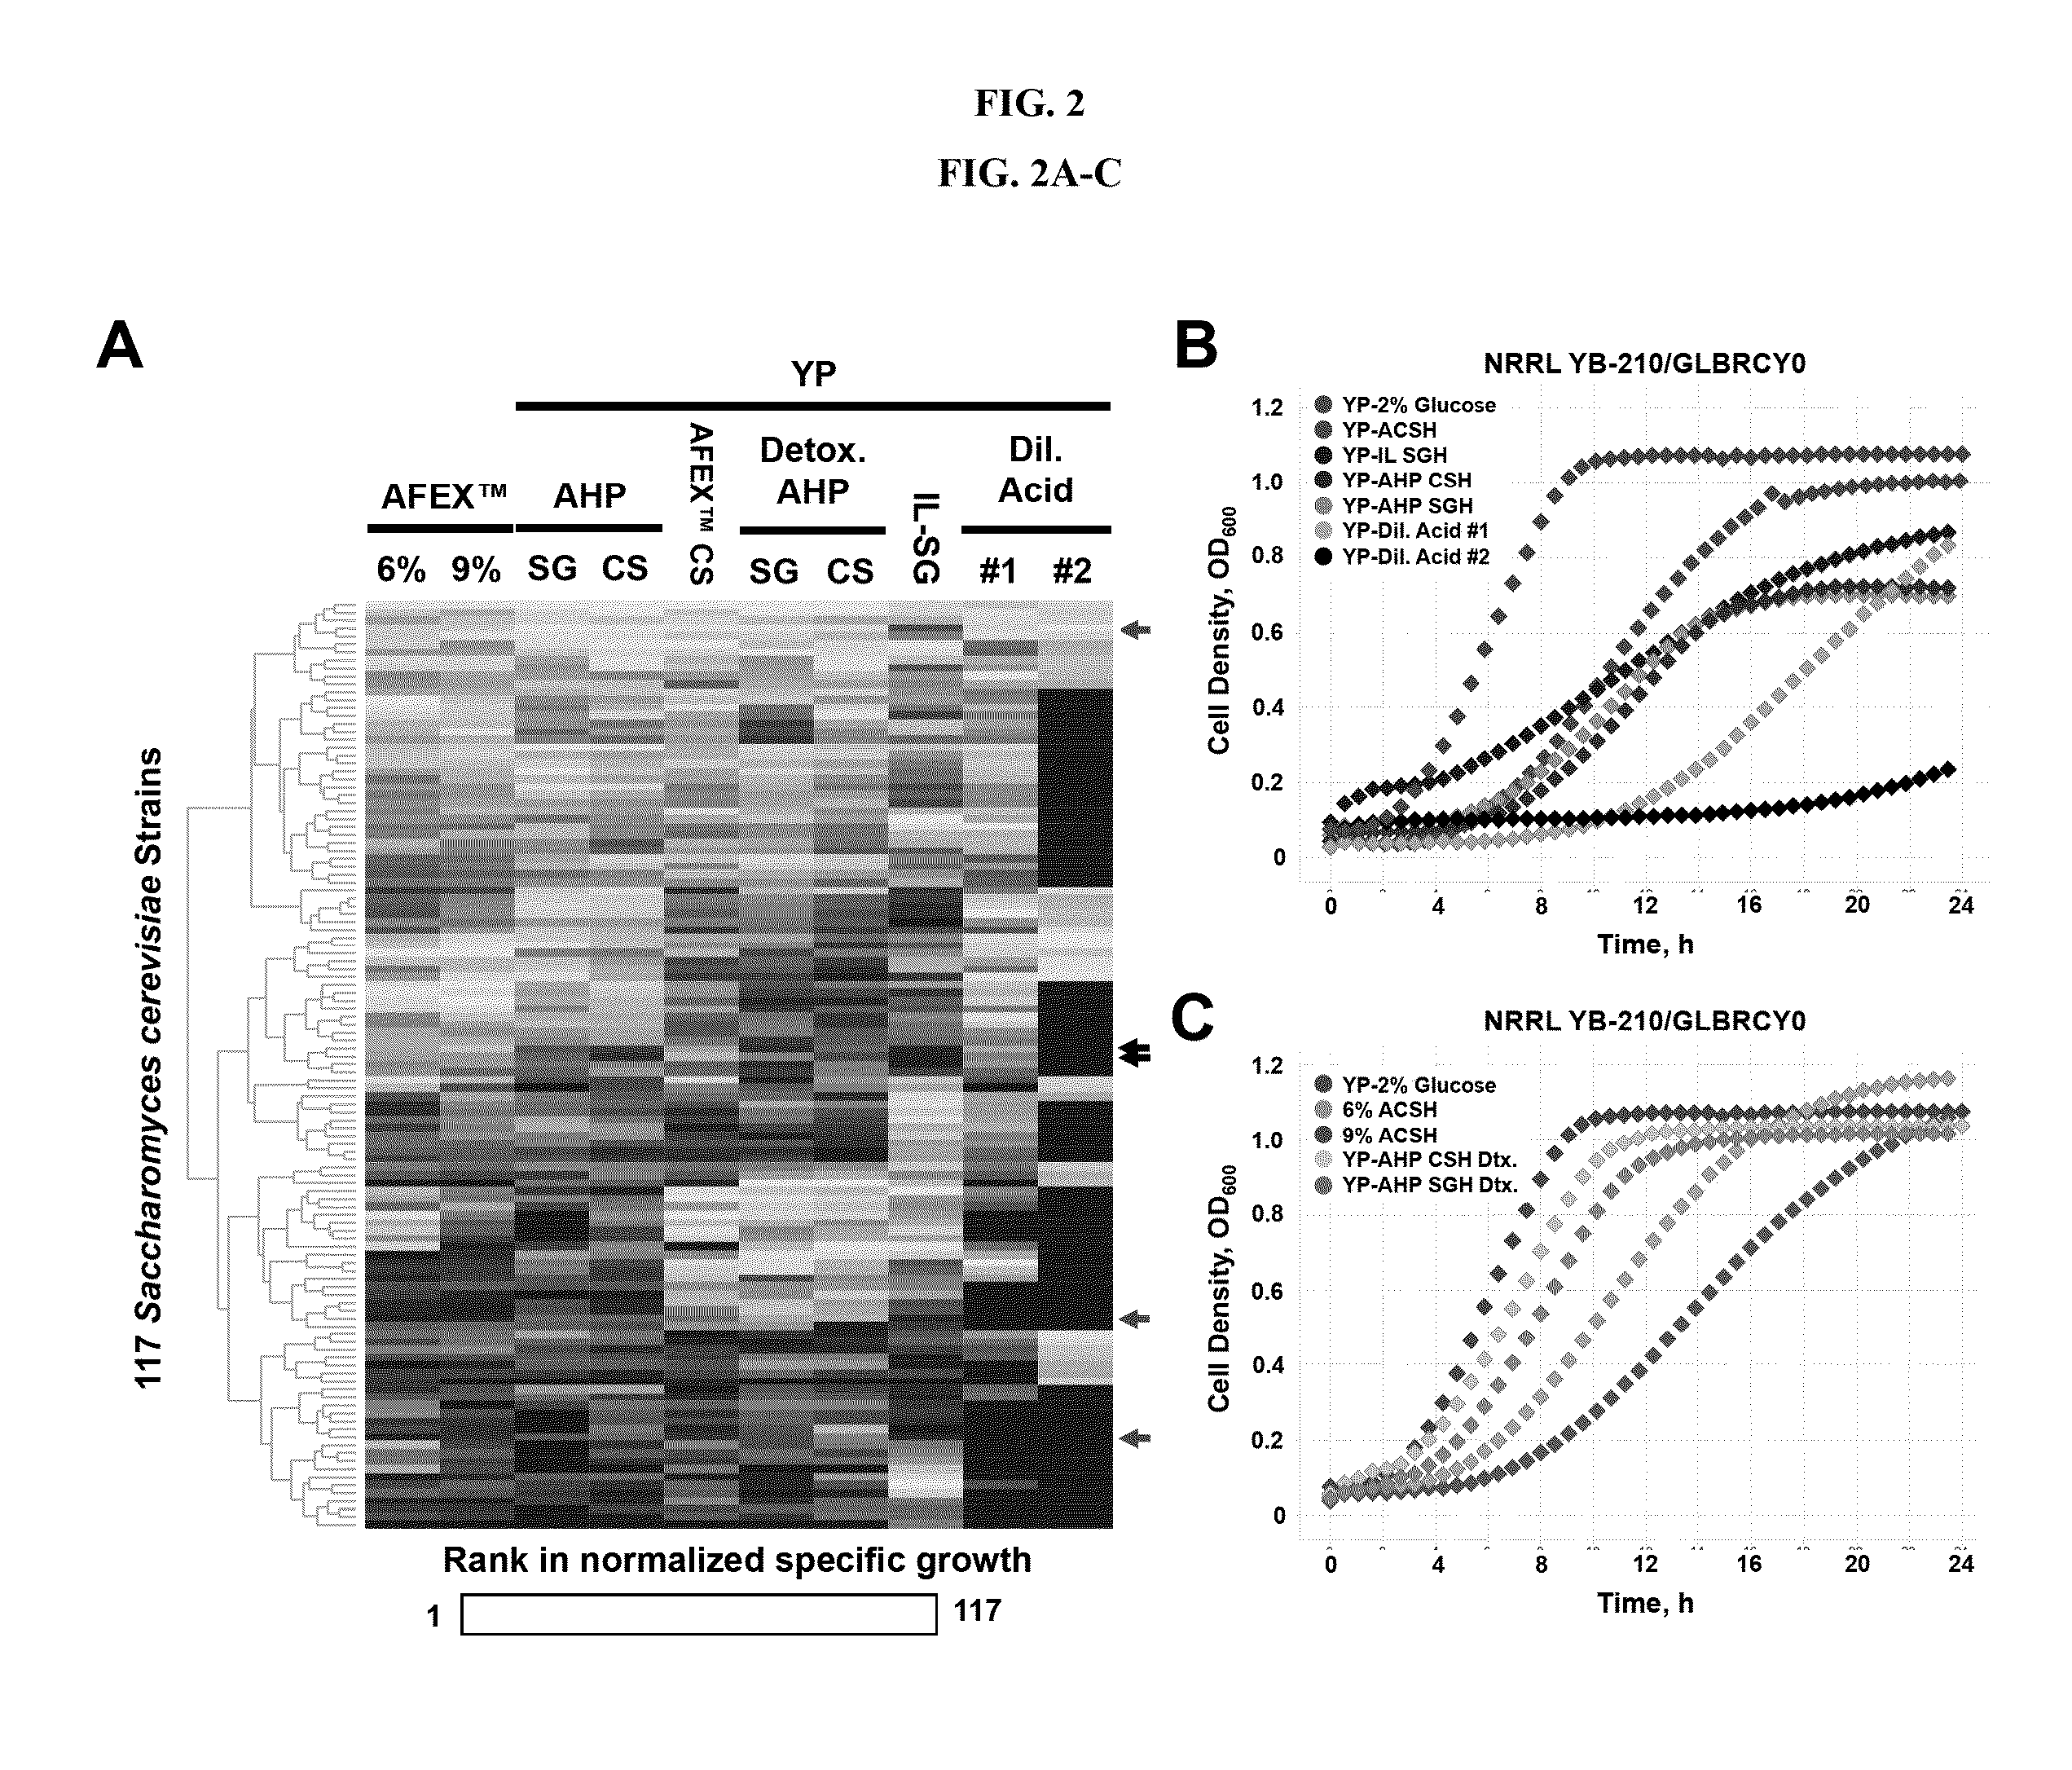 Recombinant yeast having enhanced xylose fermentation capabilities and methods of use